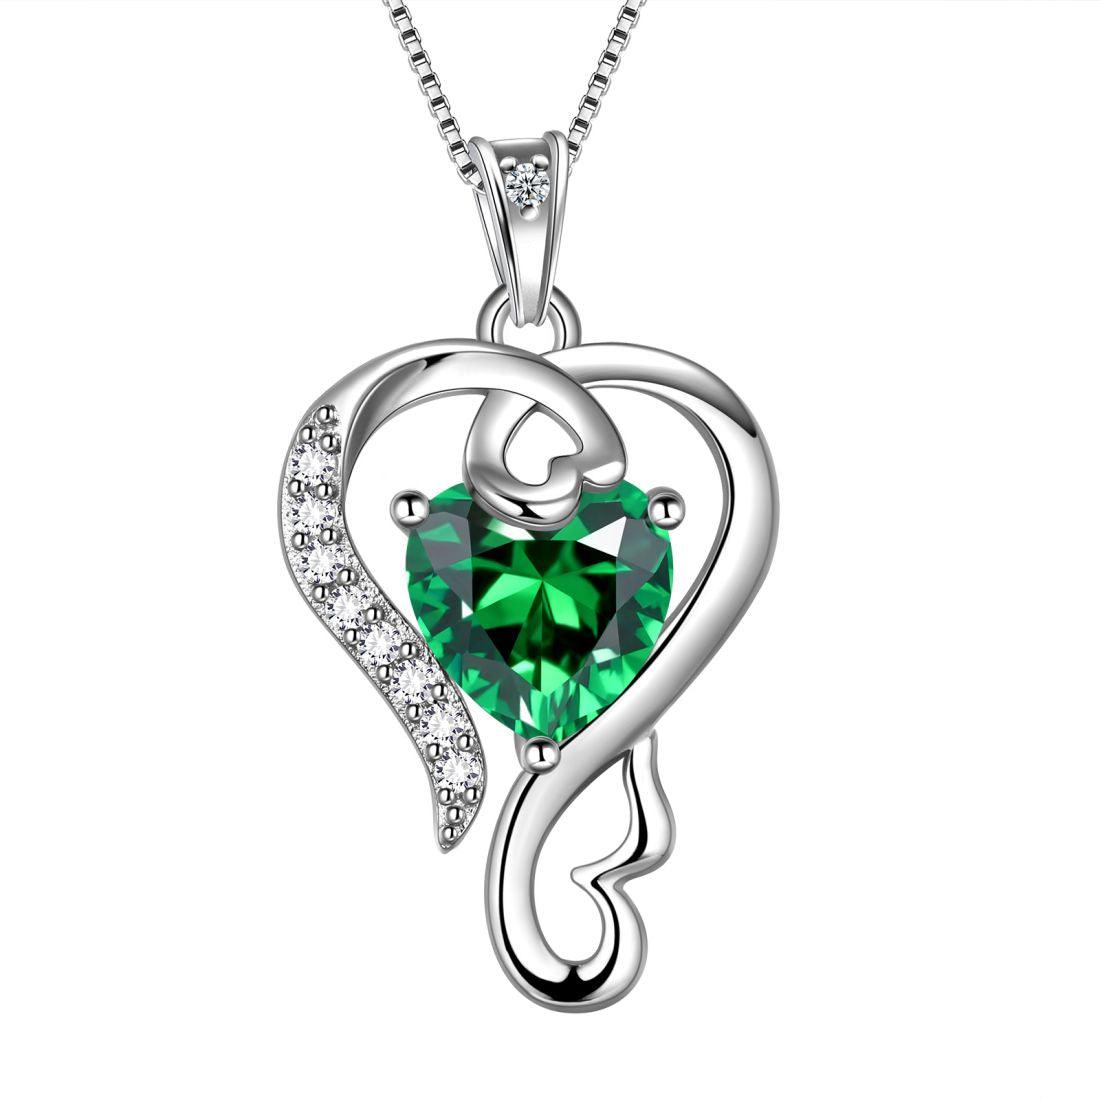 Birthstone Necklaces Love Heart Pendant 925 Sterling Silver - Necklaces - Aurora Tears Jewelry